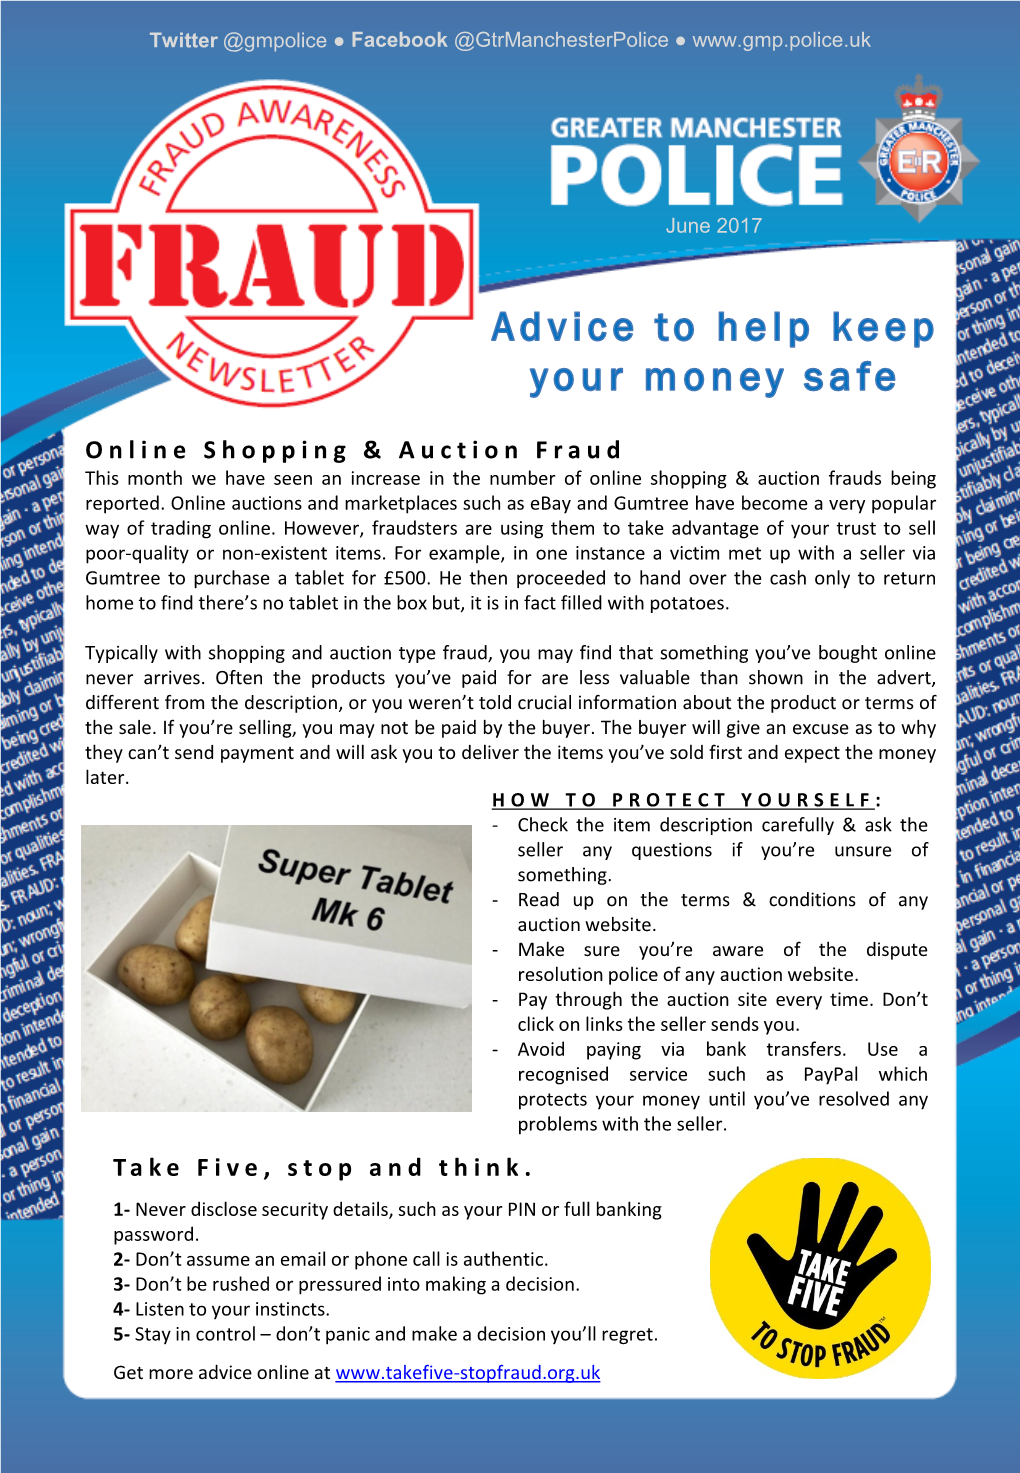 Online Shopping & Auction Fraud Take Five, Stop and Think